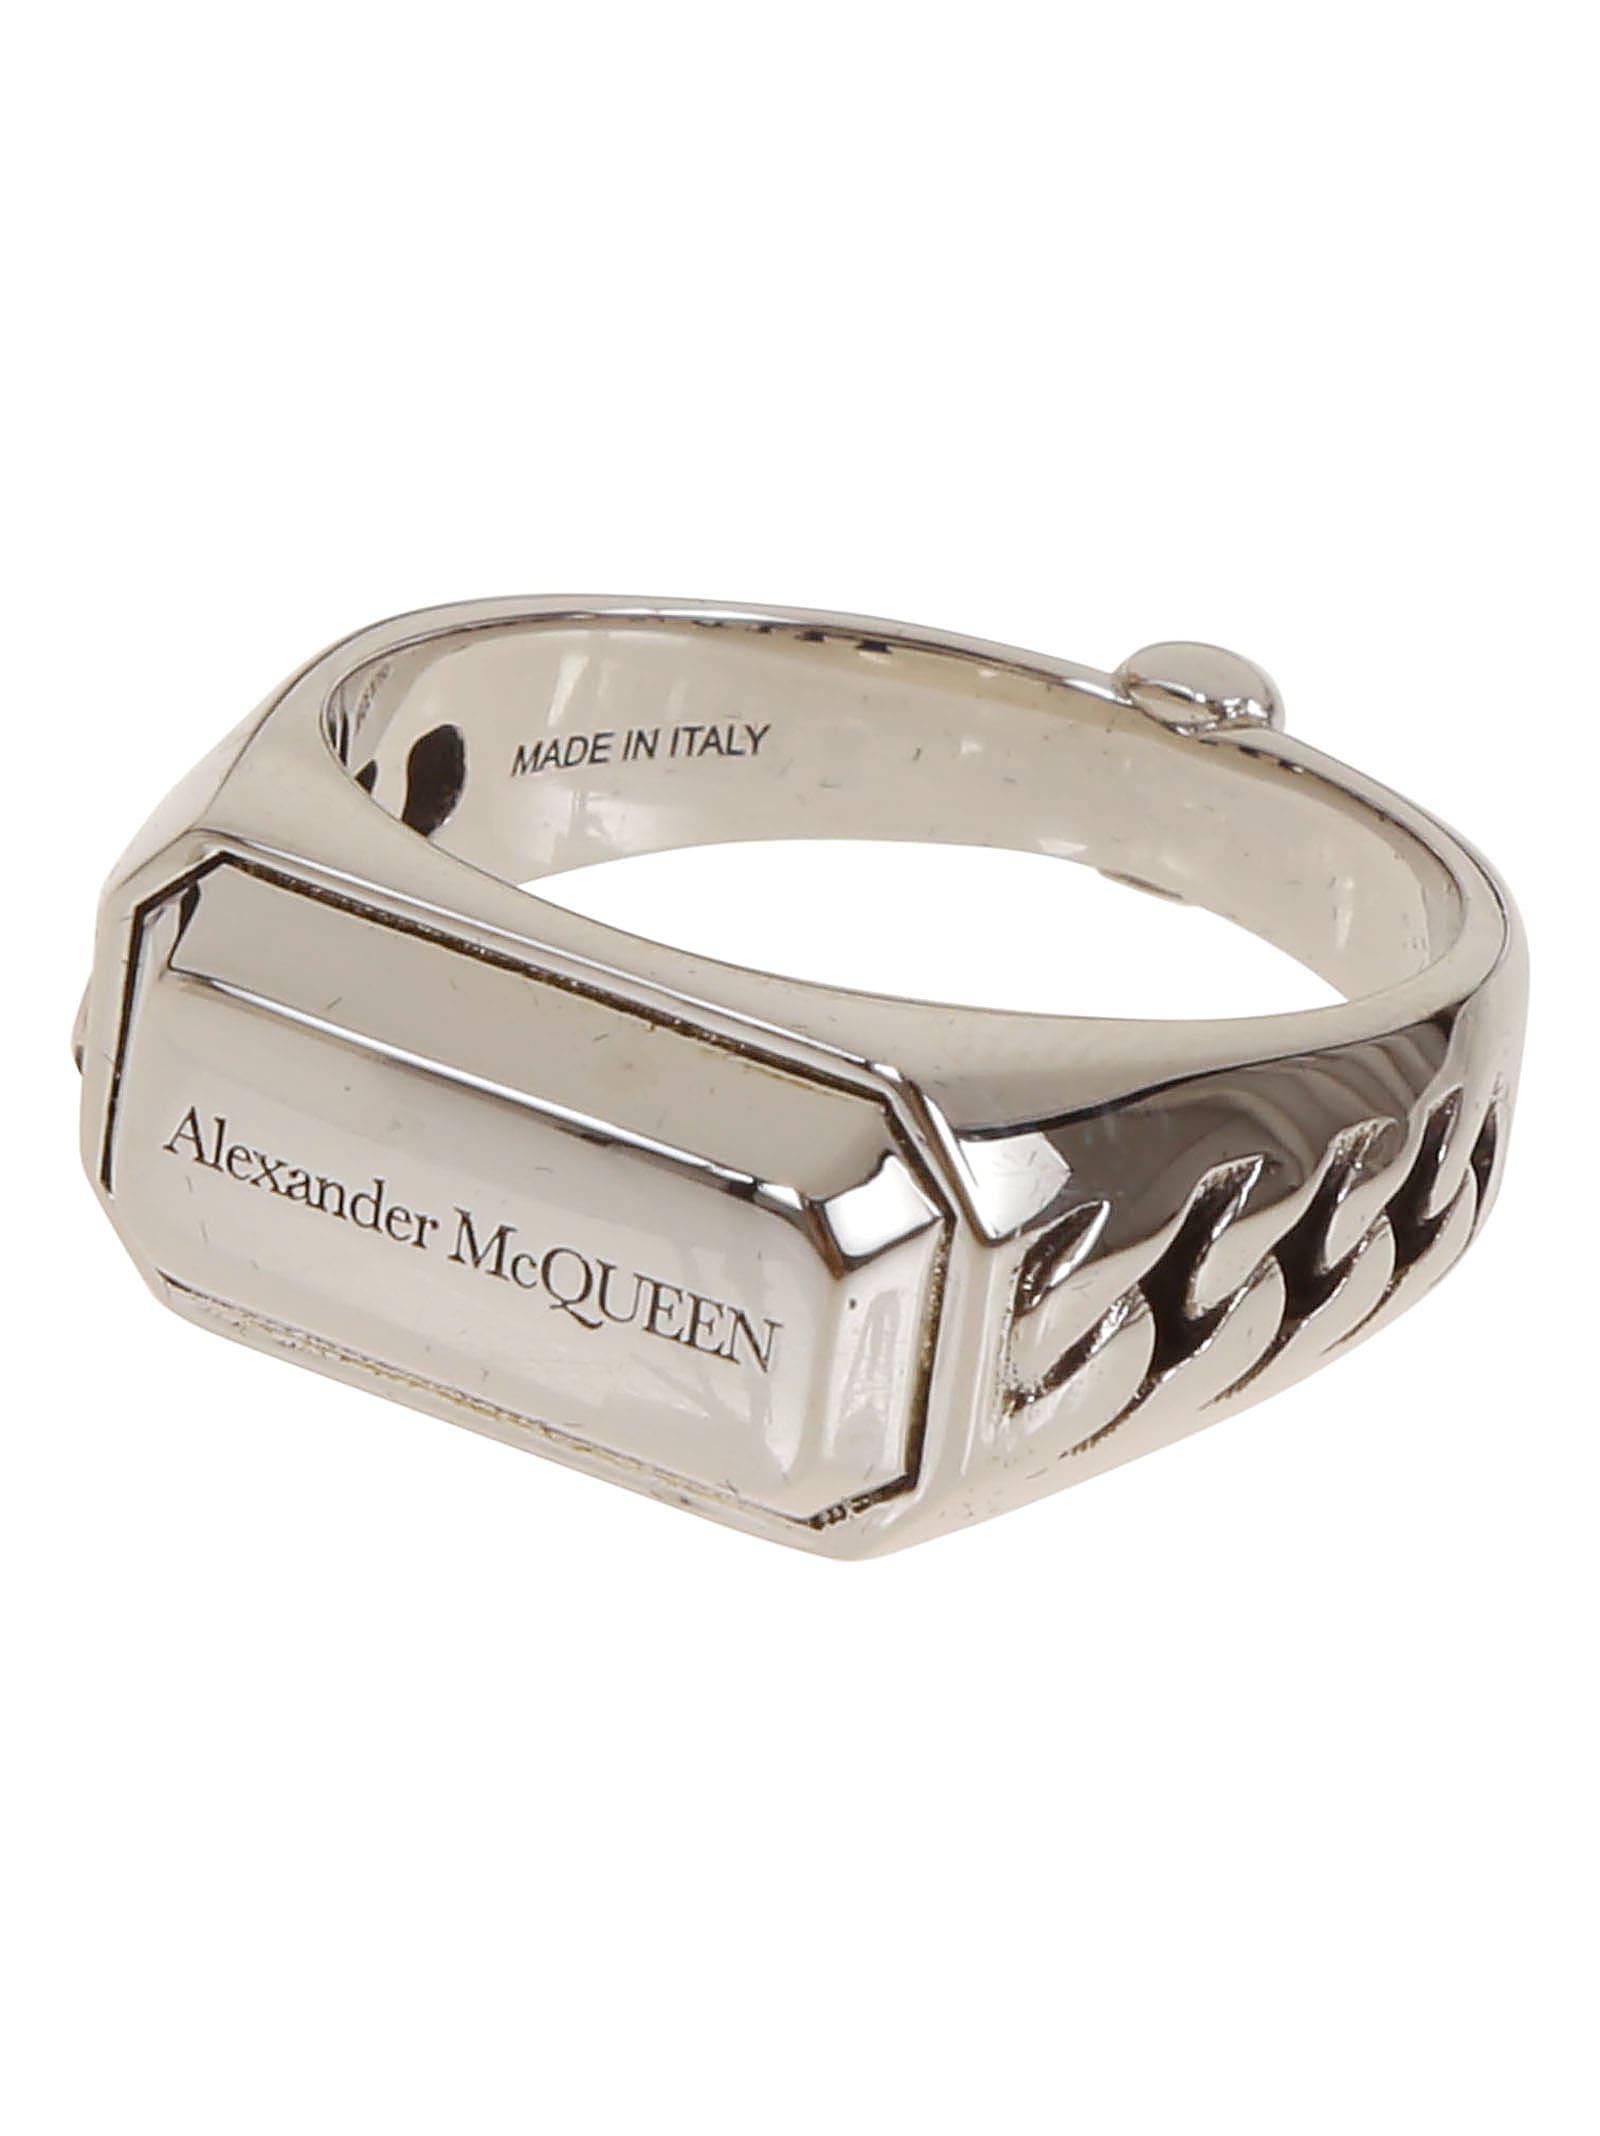 Alexander McQueen products for sale